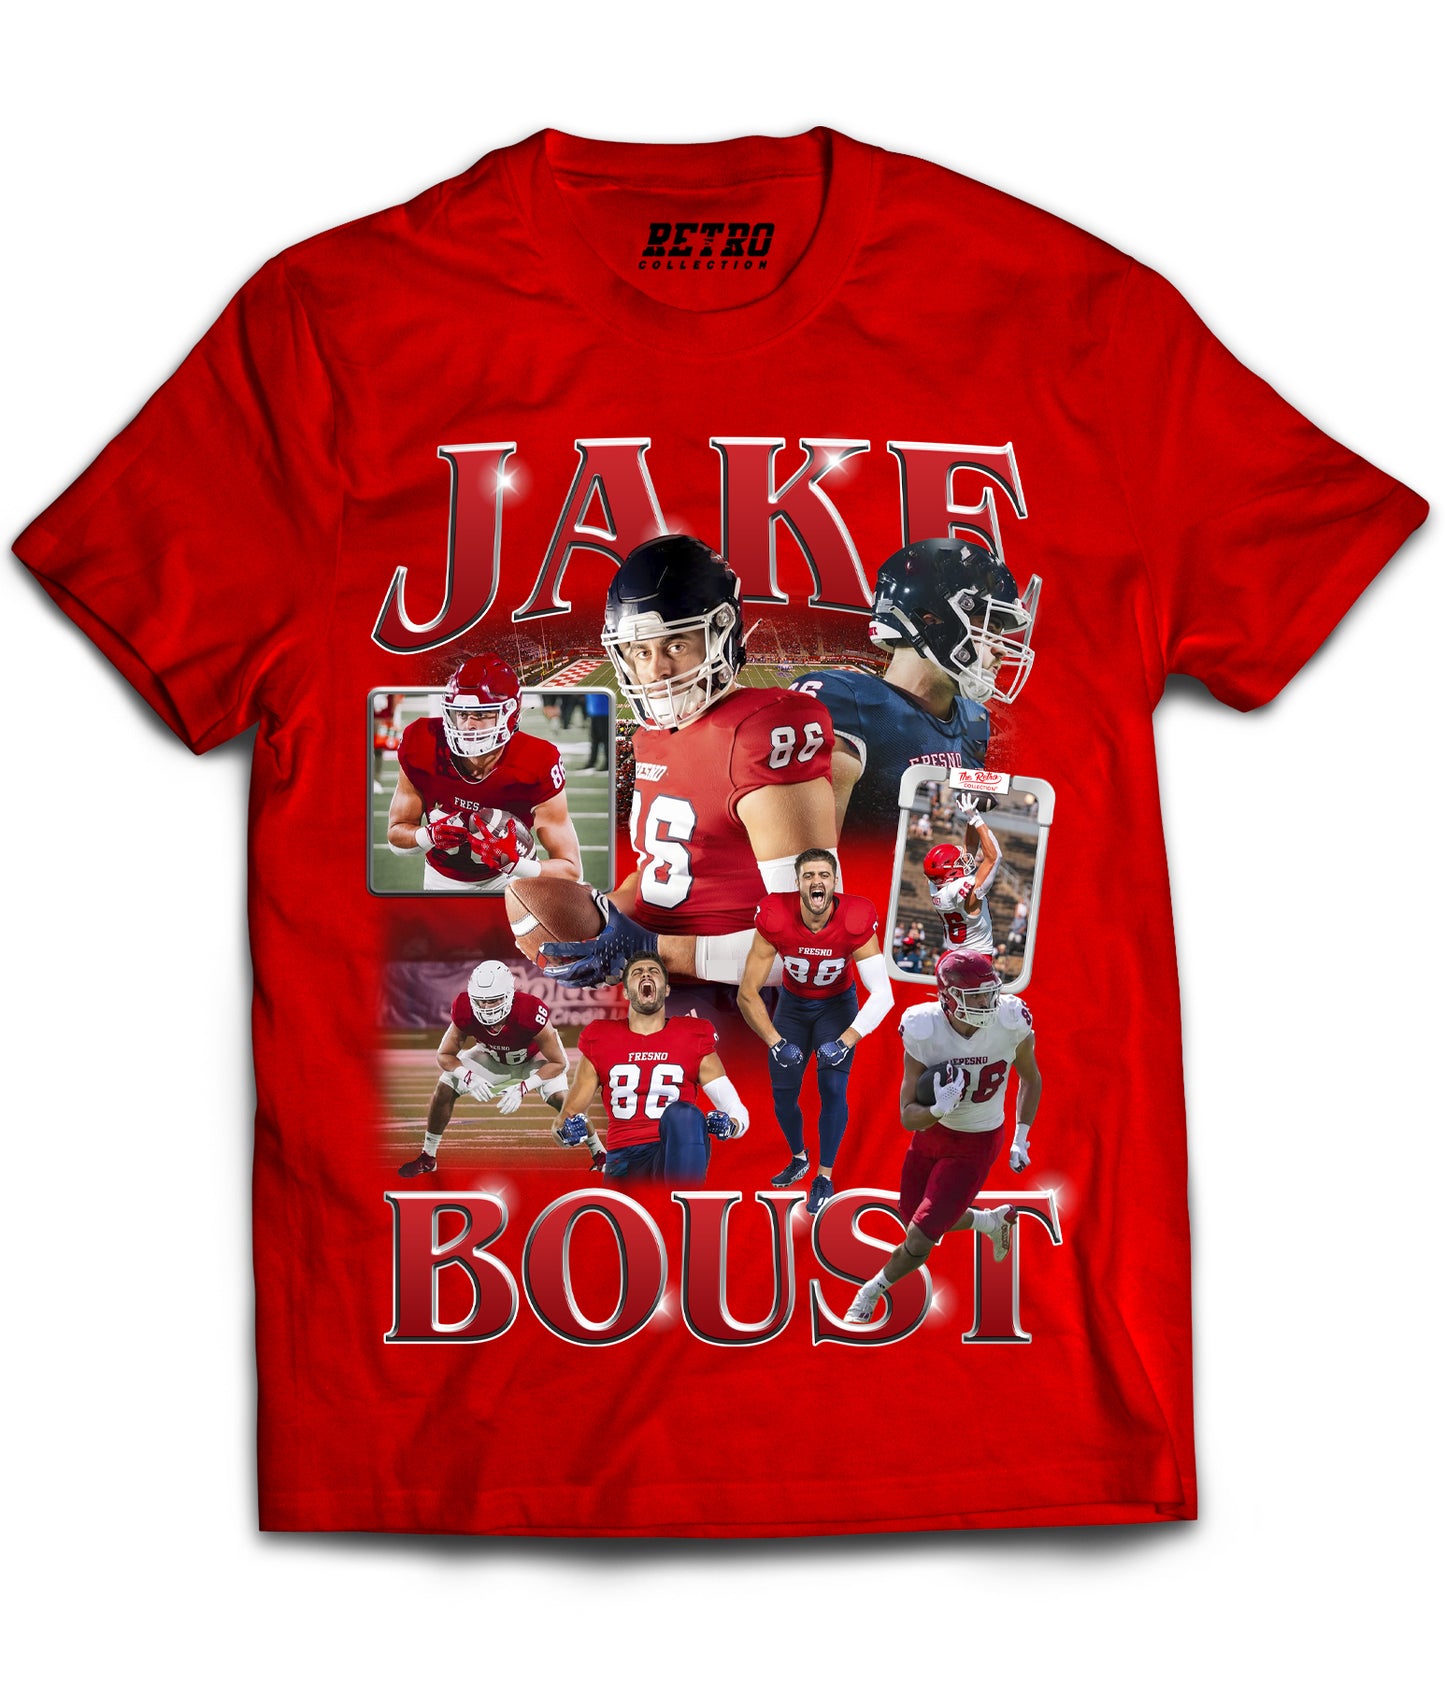 Jake Boust “TE Unstoppable” Tribute Shirt *LIMITED EDITION* (Black, Red, White)